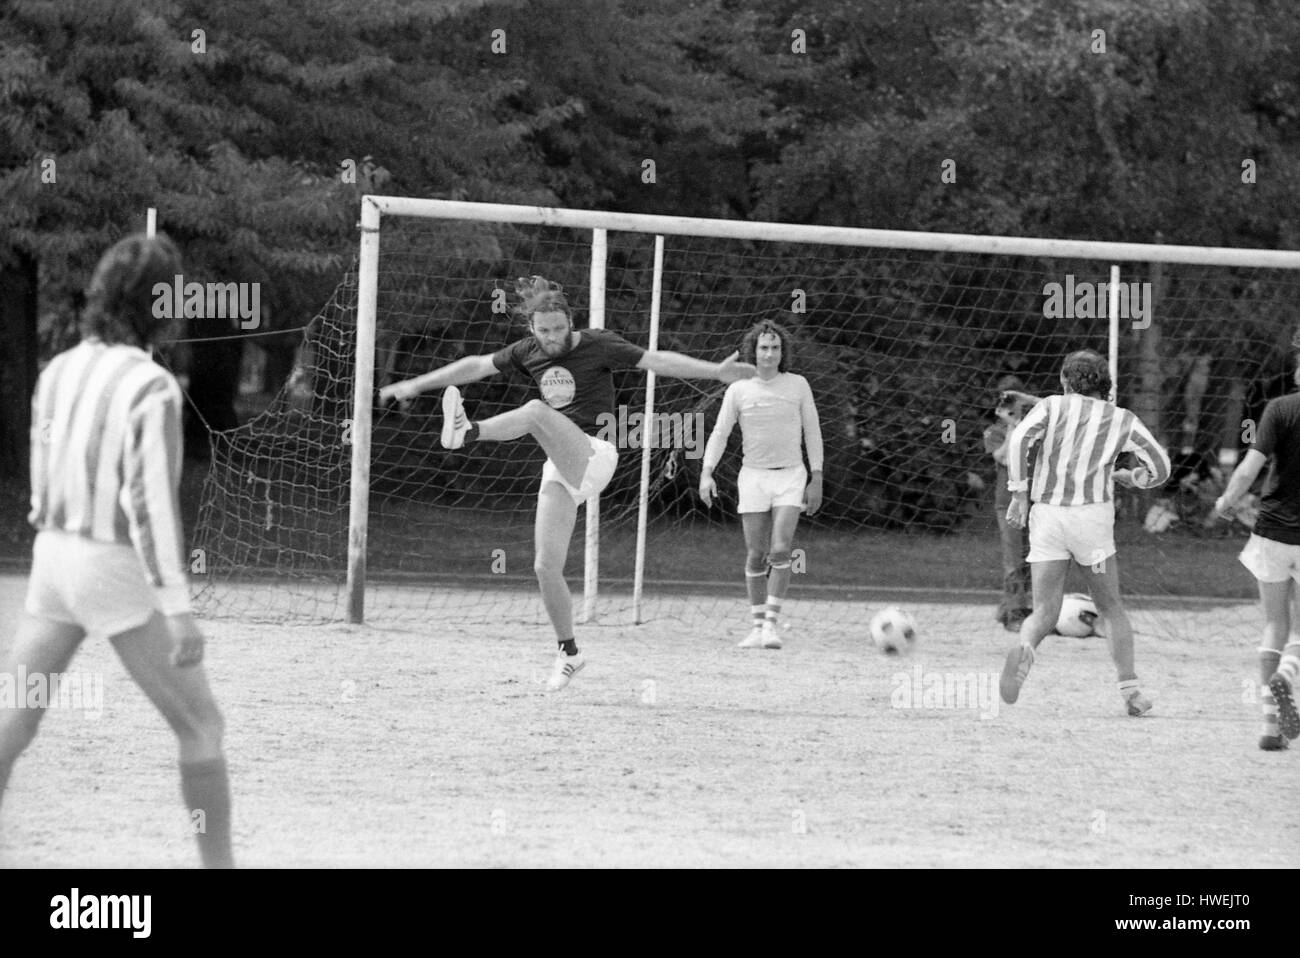 Pinki Floyd playing football - 22/06/1974 - France / Burgundy (french  region) / Dijon - The day following their concert, members of Pink Floyd  went to play a football match - Philippe Gras / Le Pictorium Stock Photo -  Alamy